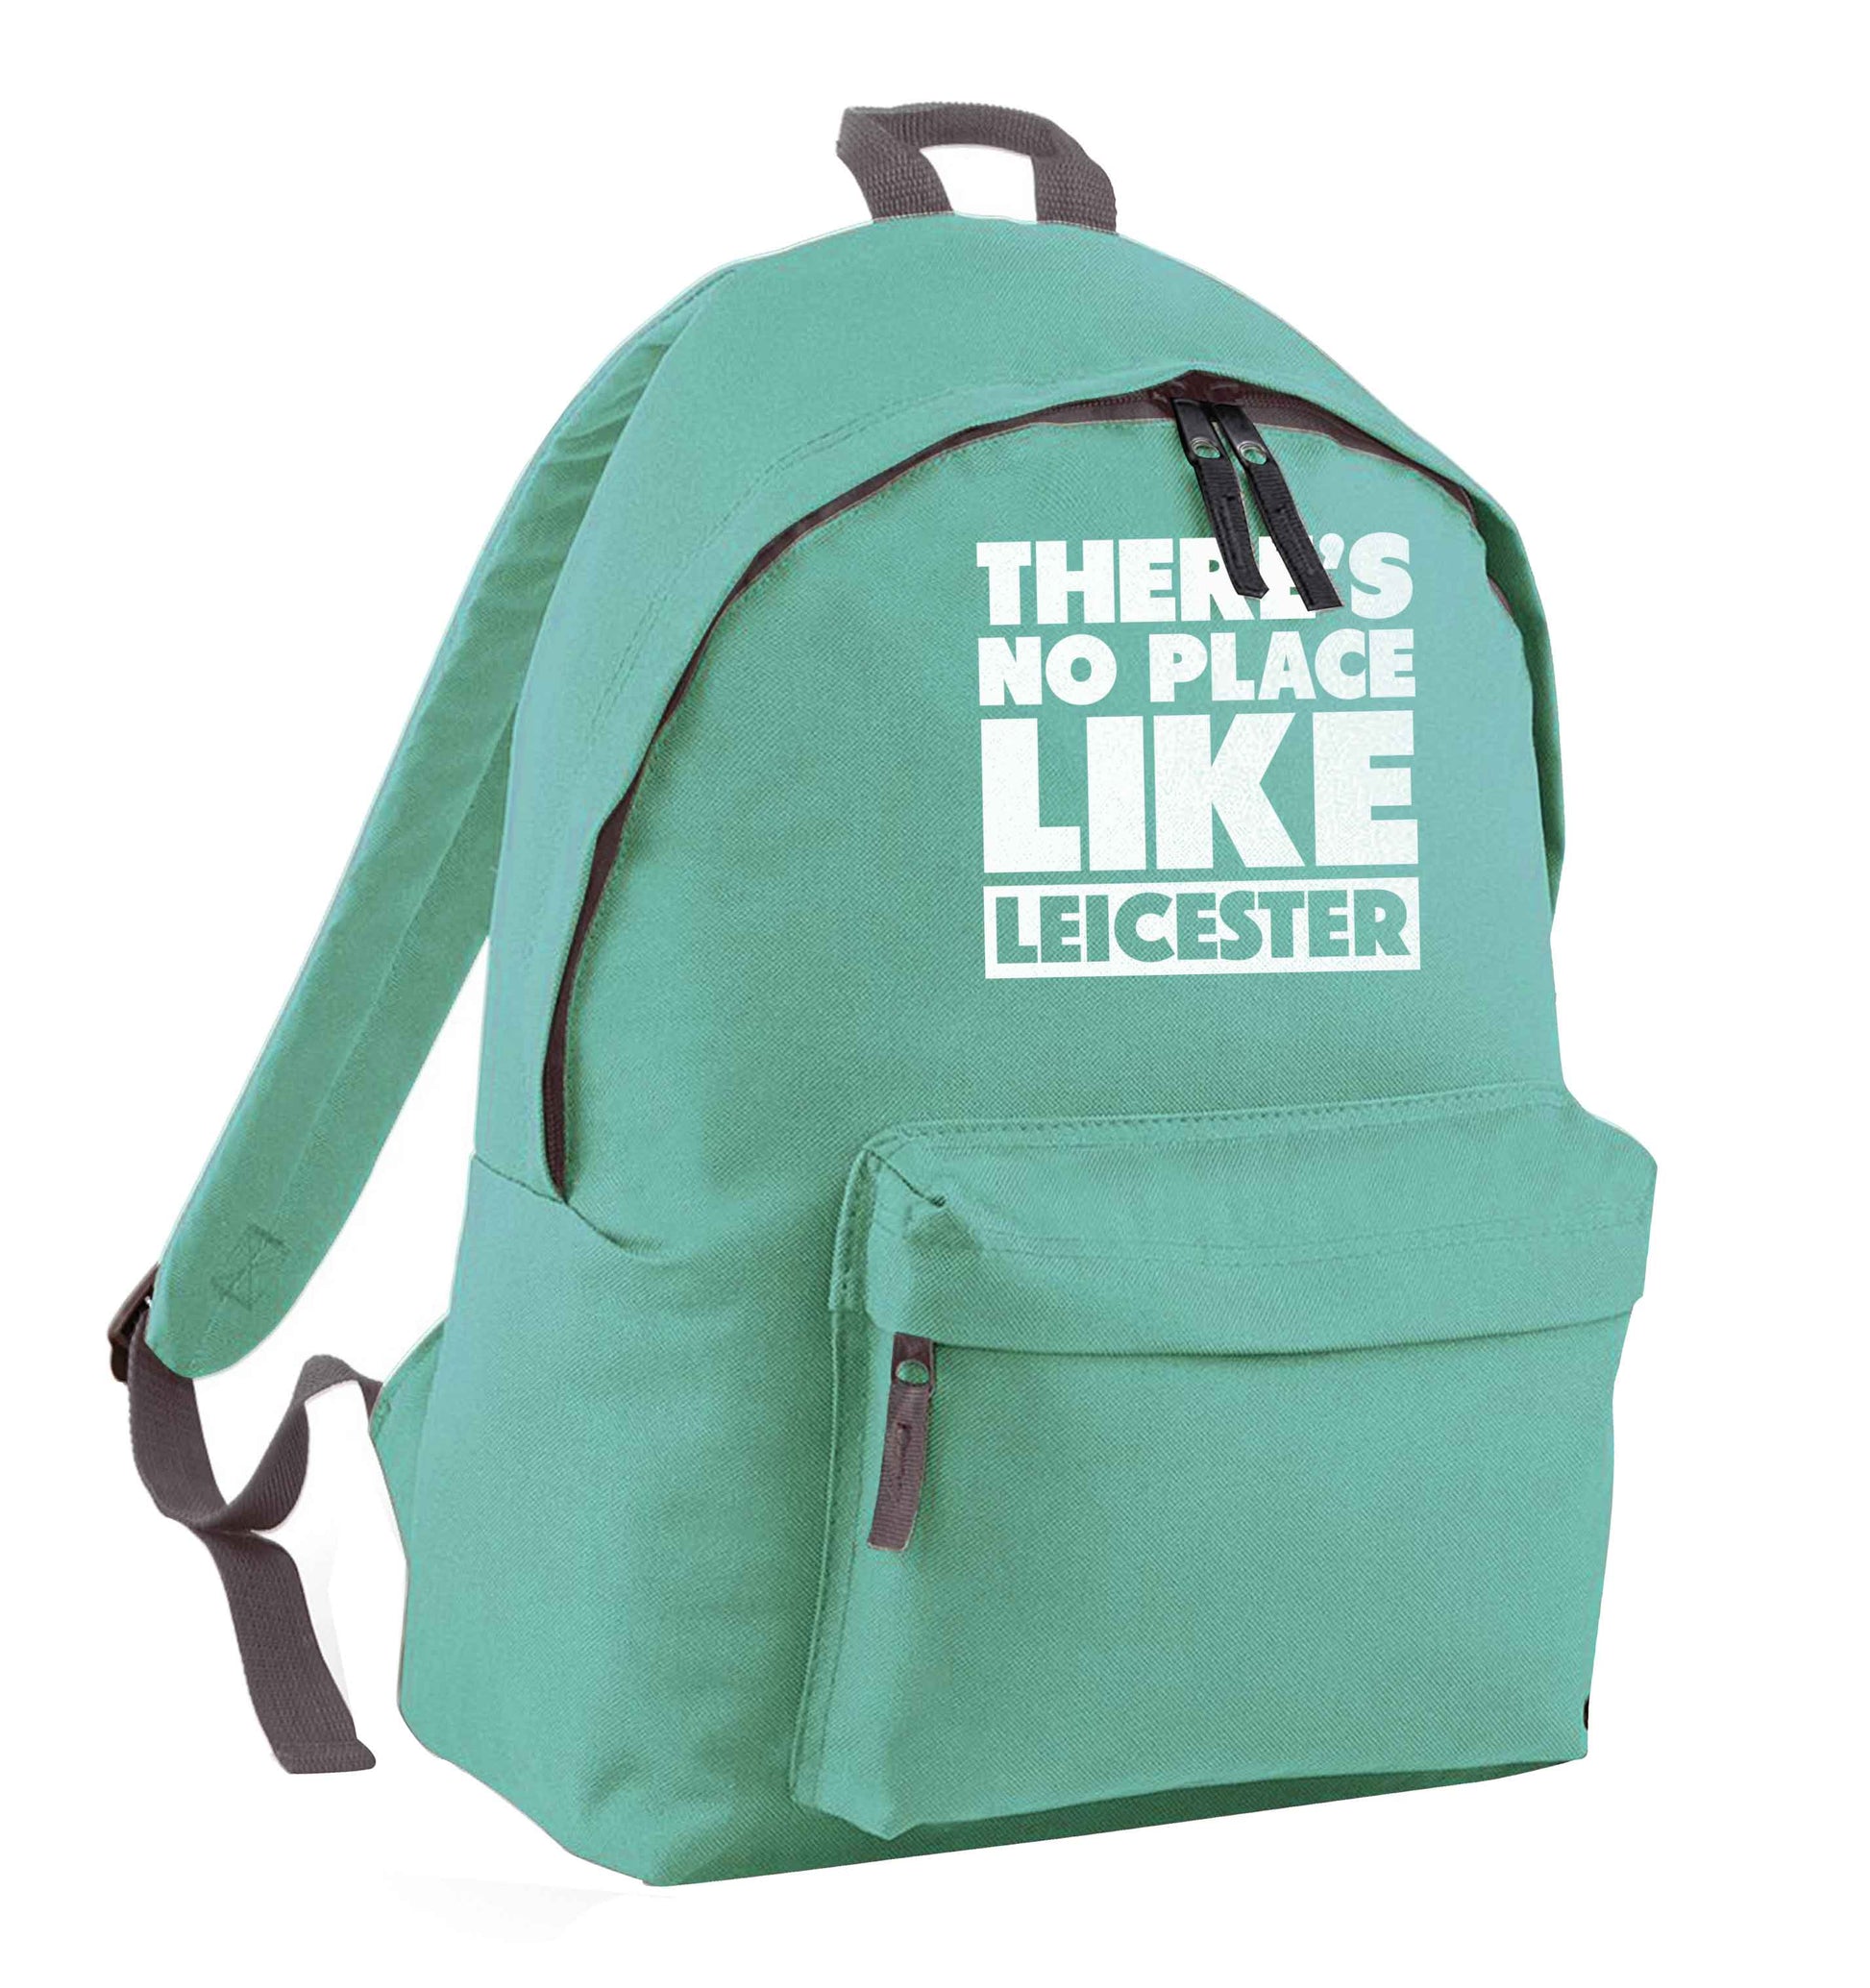 There's no place like Leicester mint adults backpack